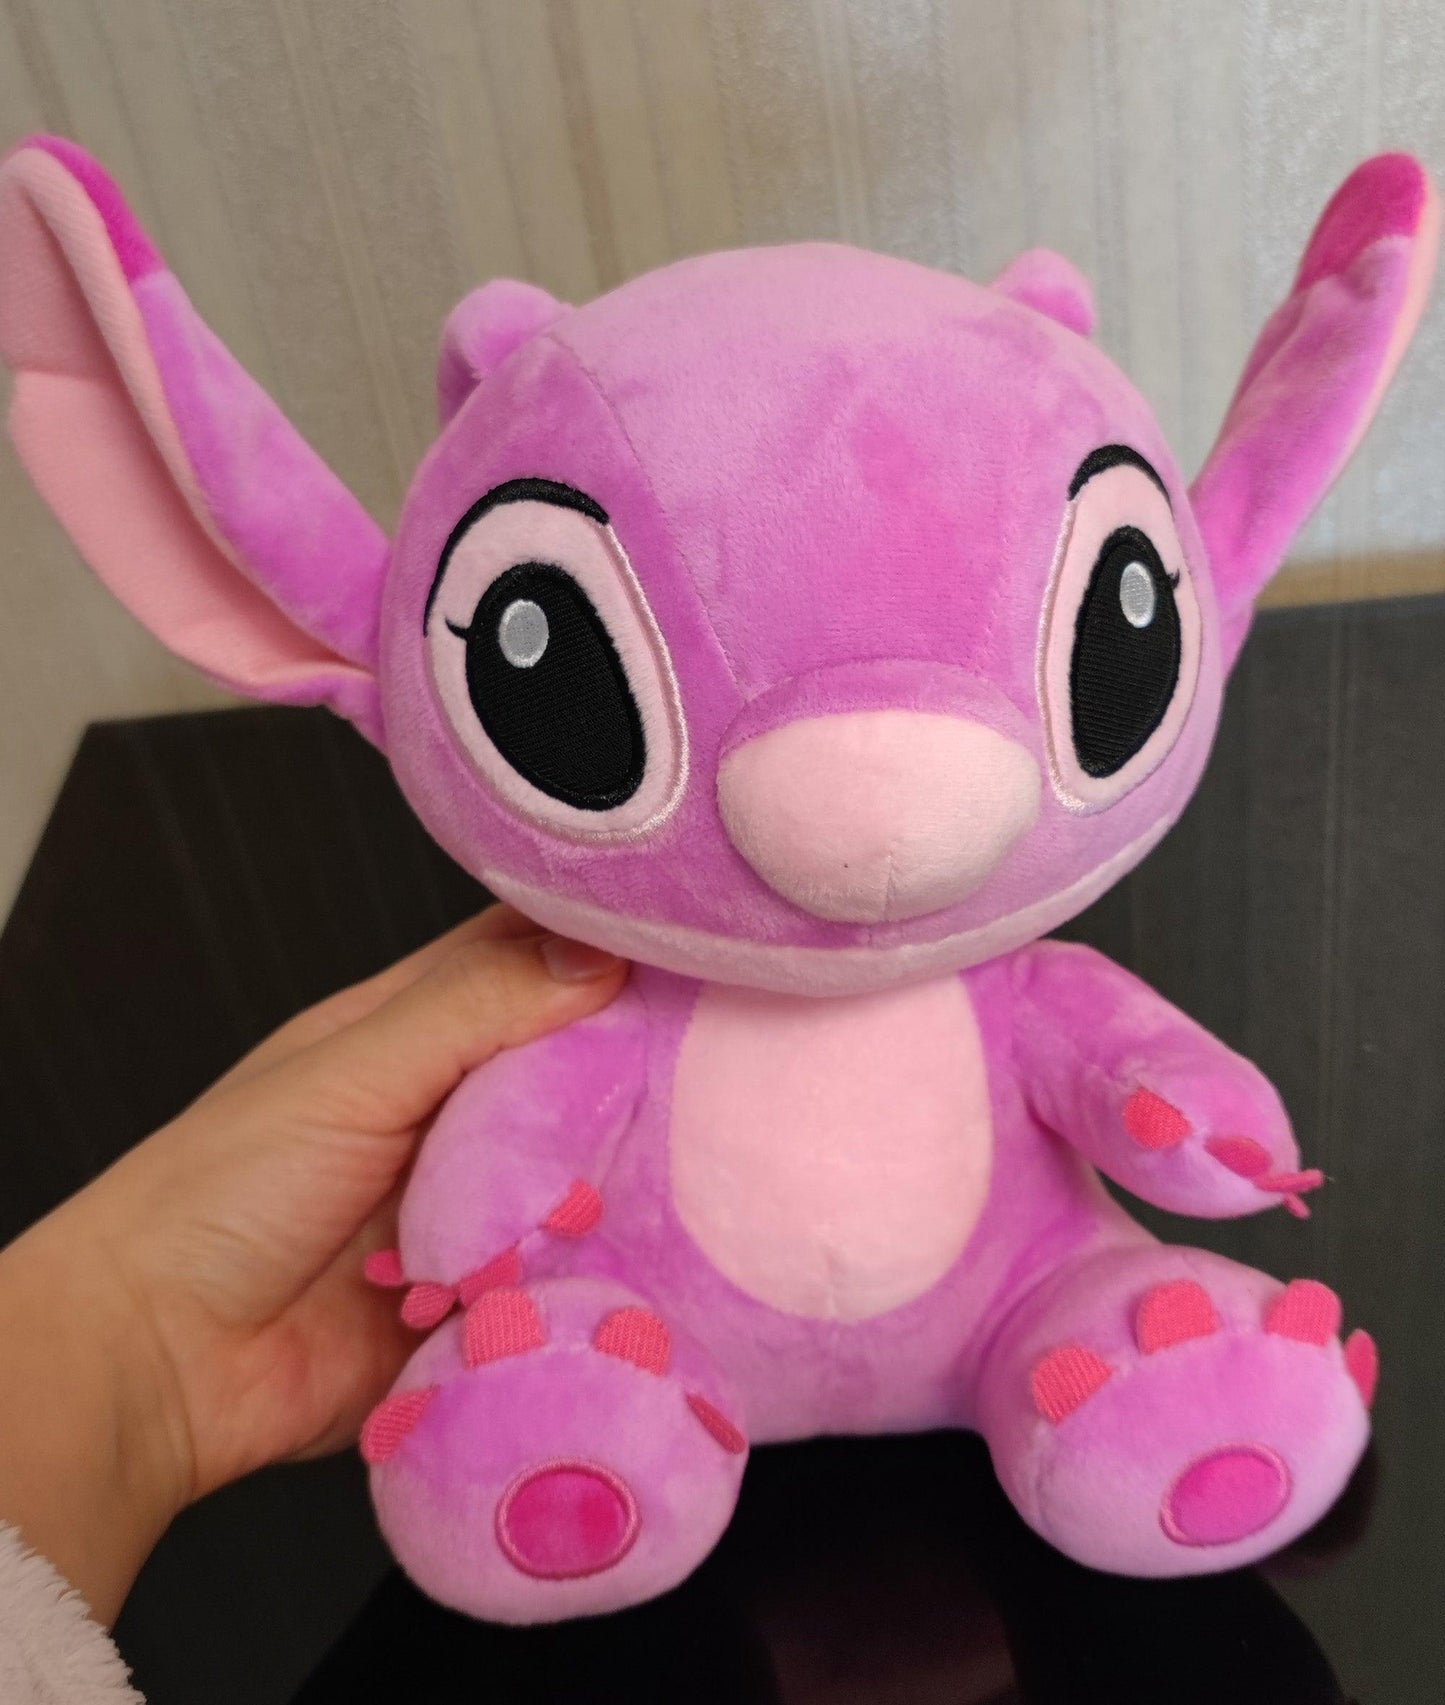 Disney Lilo Doll in Playful Pink Color